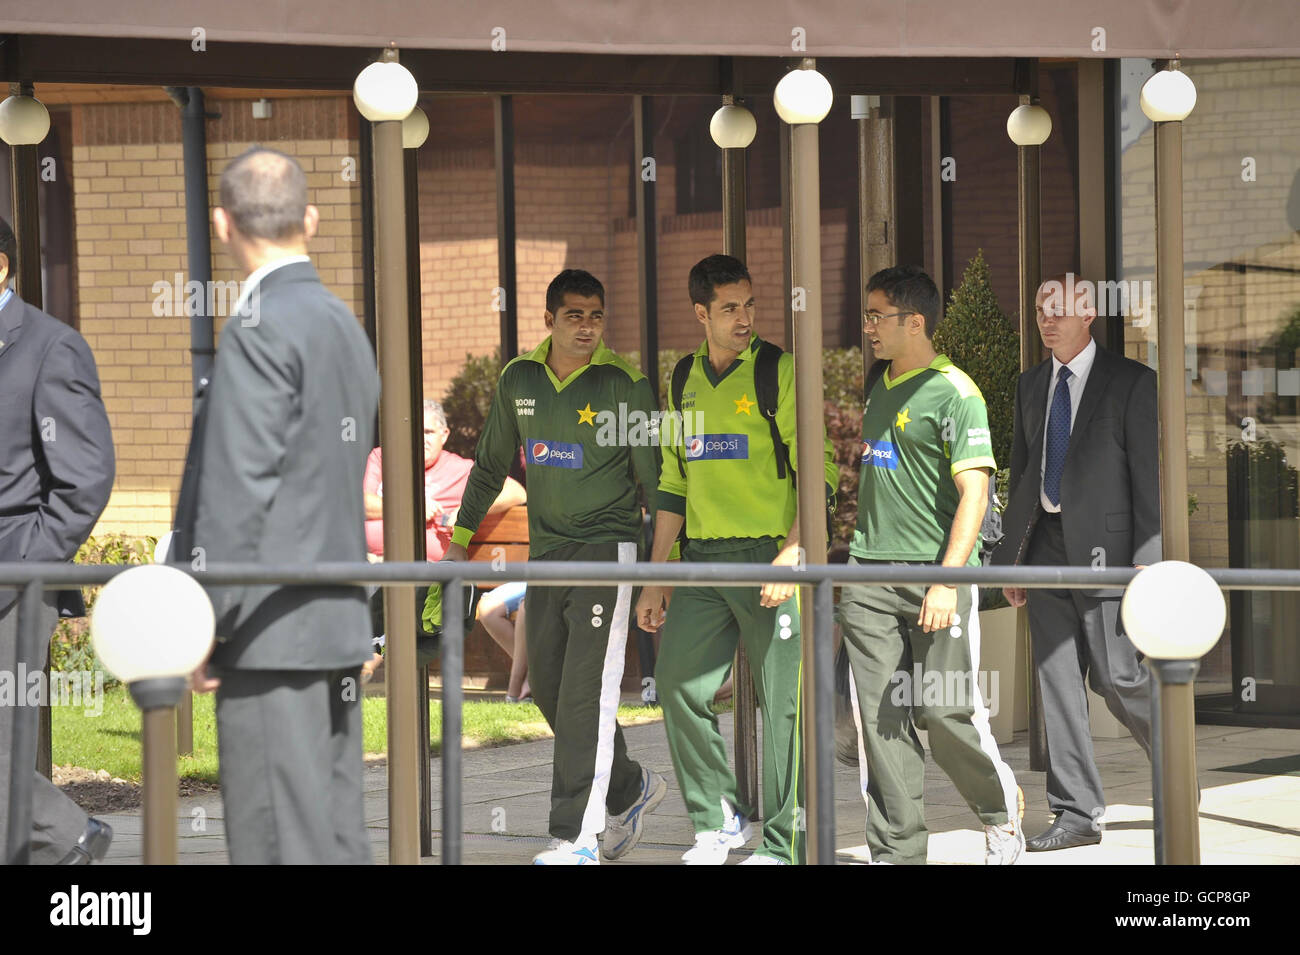 Pakistan cricketer, bowler, Umar Gul (centre) leaves the team's hotel in Taunton, Somerset. Stock Photo